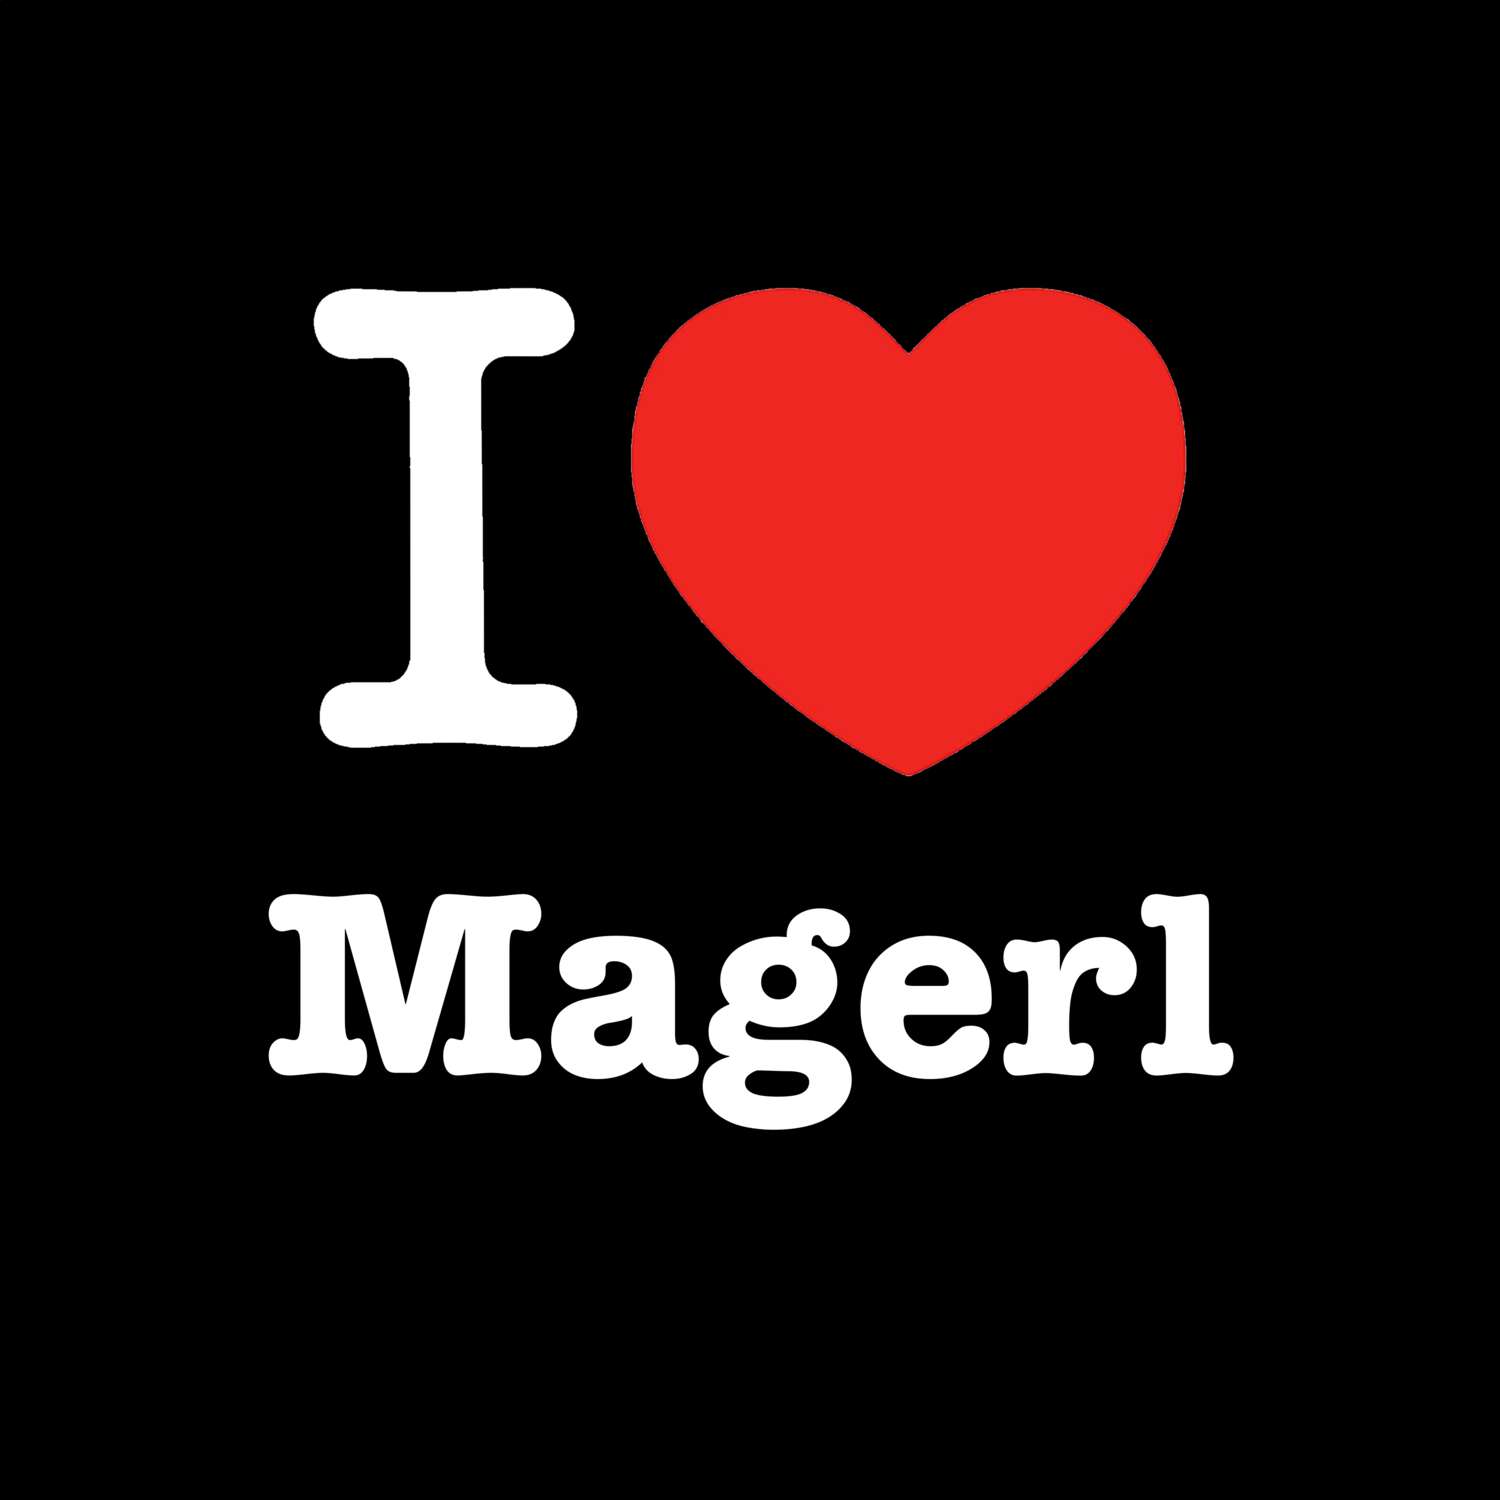 Magerl T-Shirt »I love«